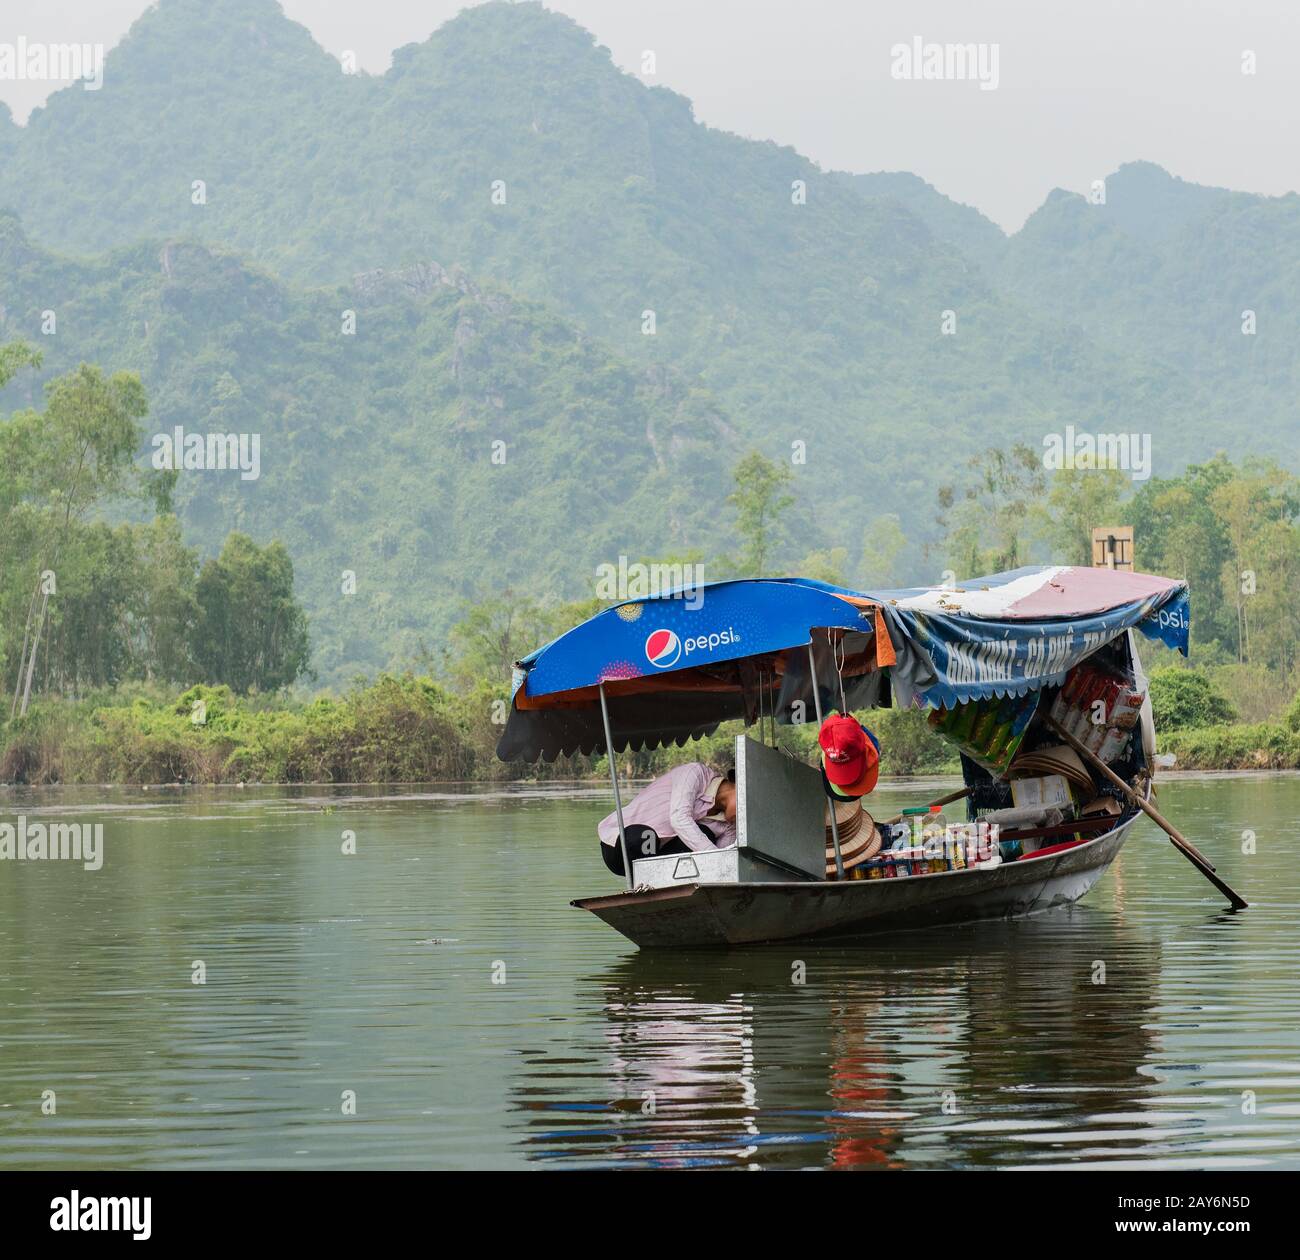 Vietnamese souvenir seller selling on a boat at the Red River in Hanoi, Vietnam Stock Photo